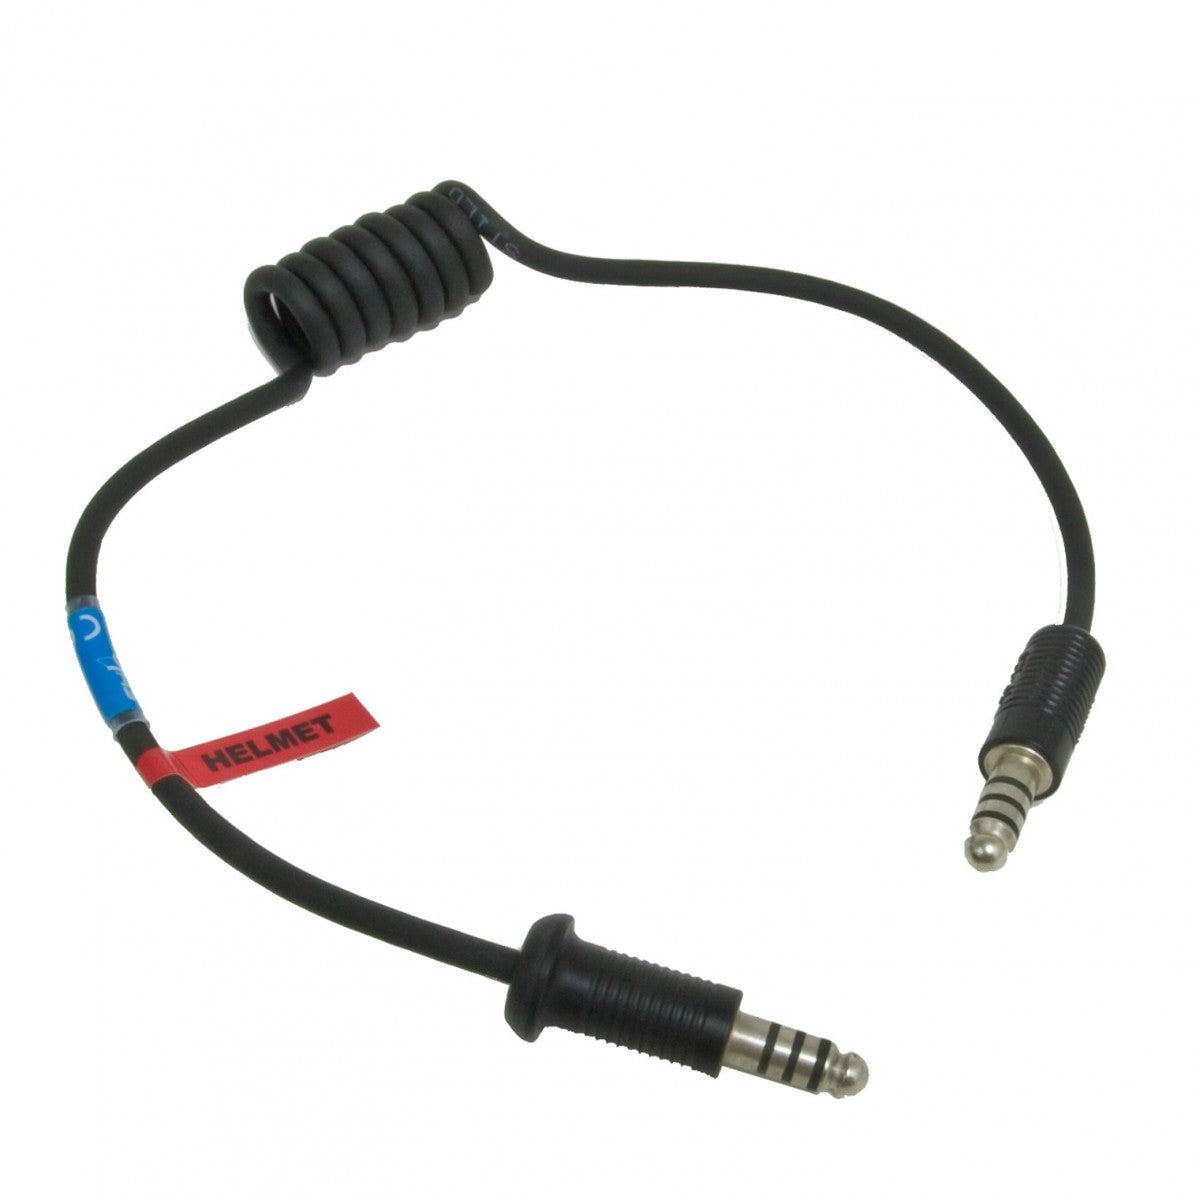 Stilo 4 Connector to 4 Connector IMSA Style Adapter